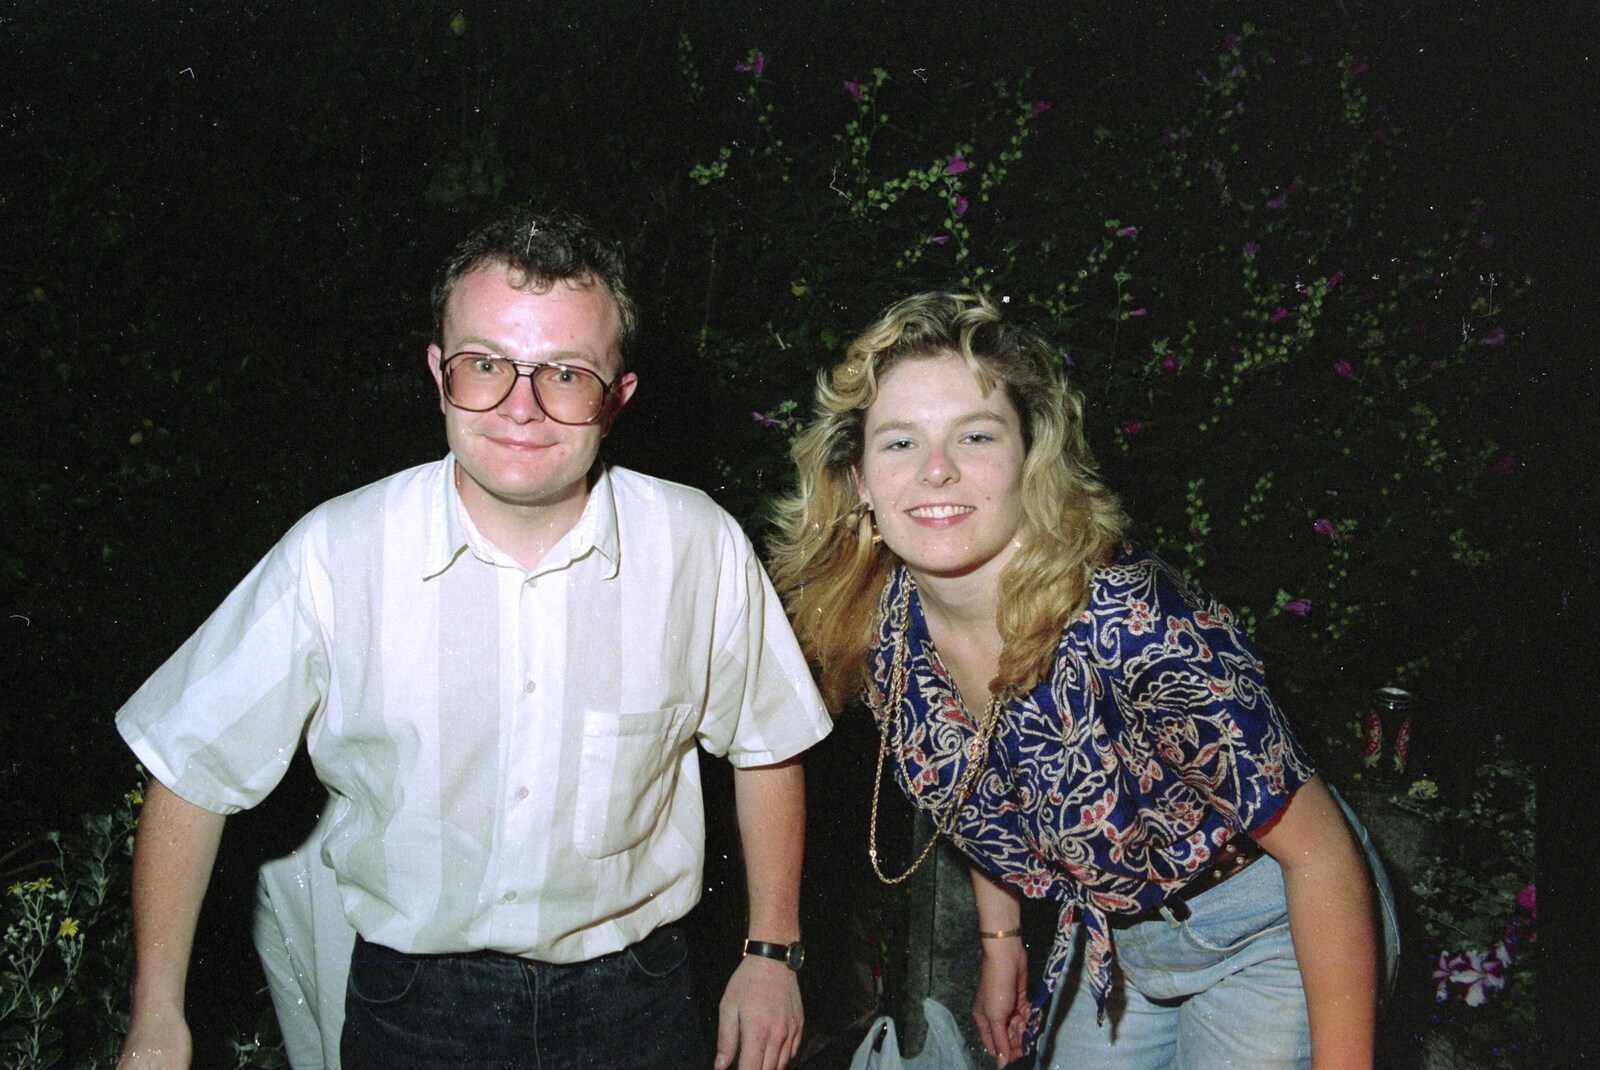 Chris and Phil's Party, Hordle, Hampshire - 6th September 1989: Hamish and Jo Funnel